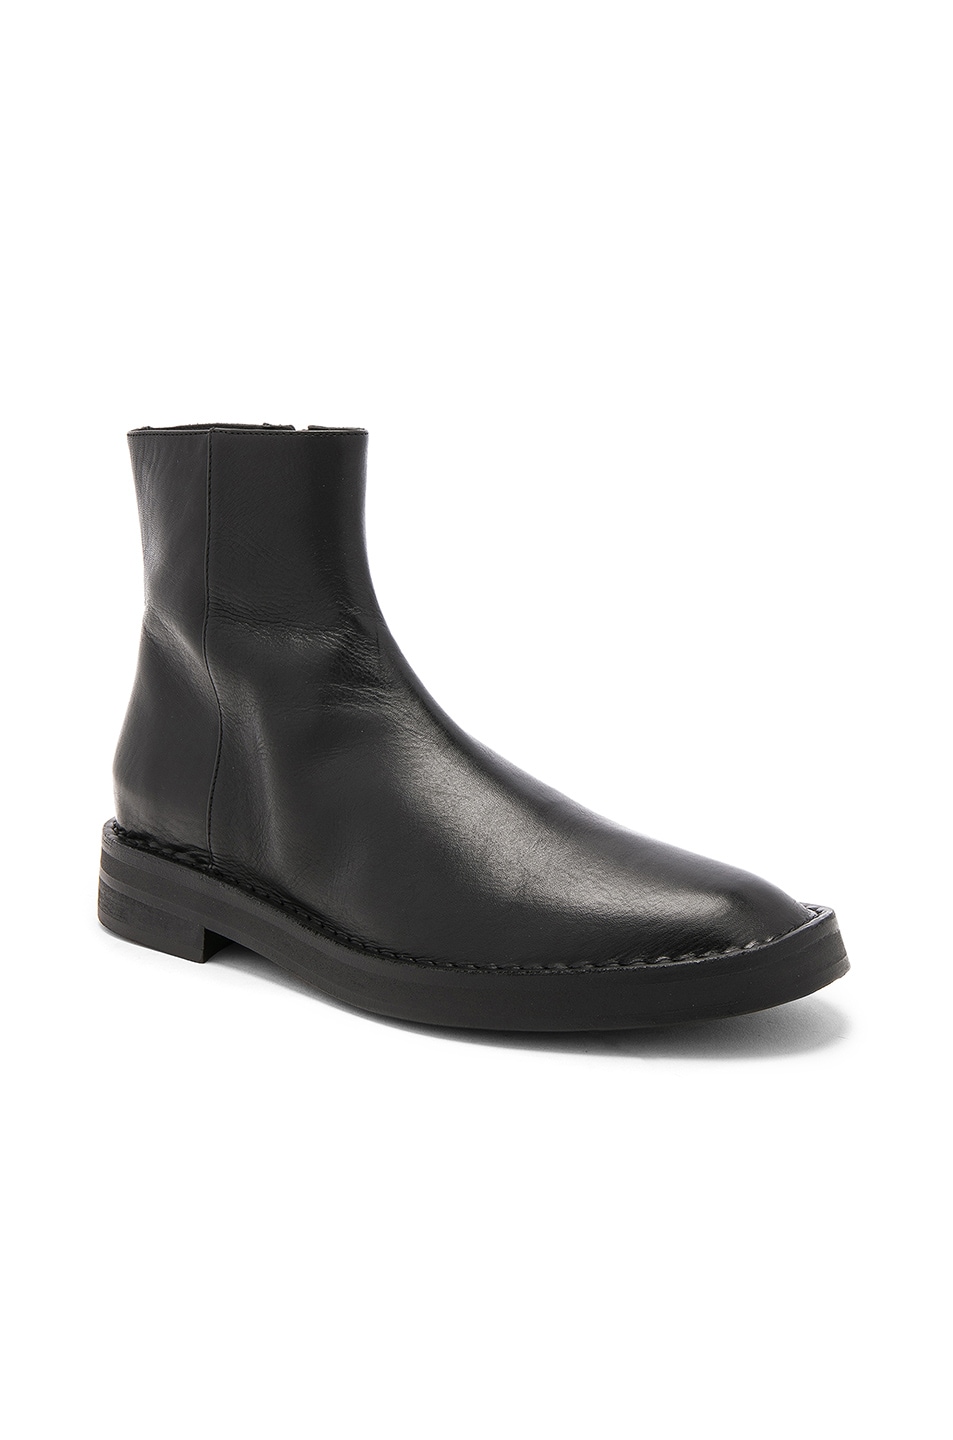 Image 1 of Ann Demeulemeester Leather Boots in Black